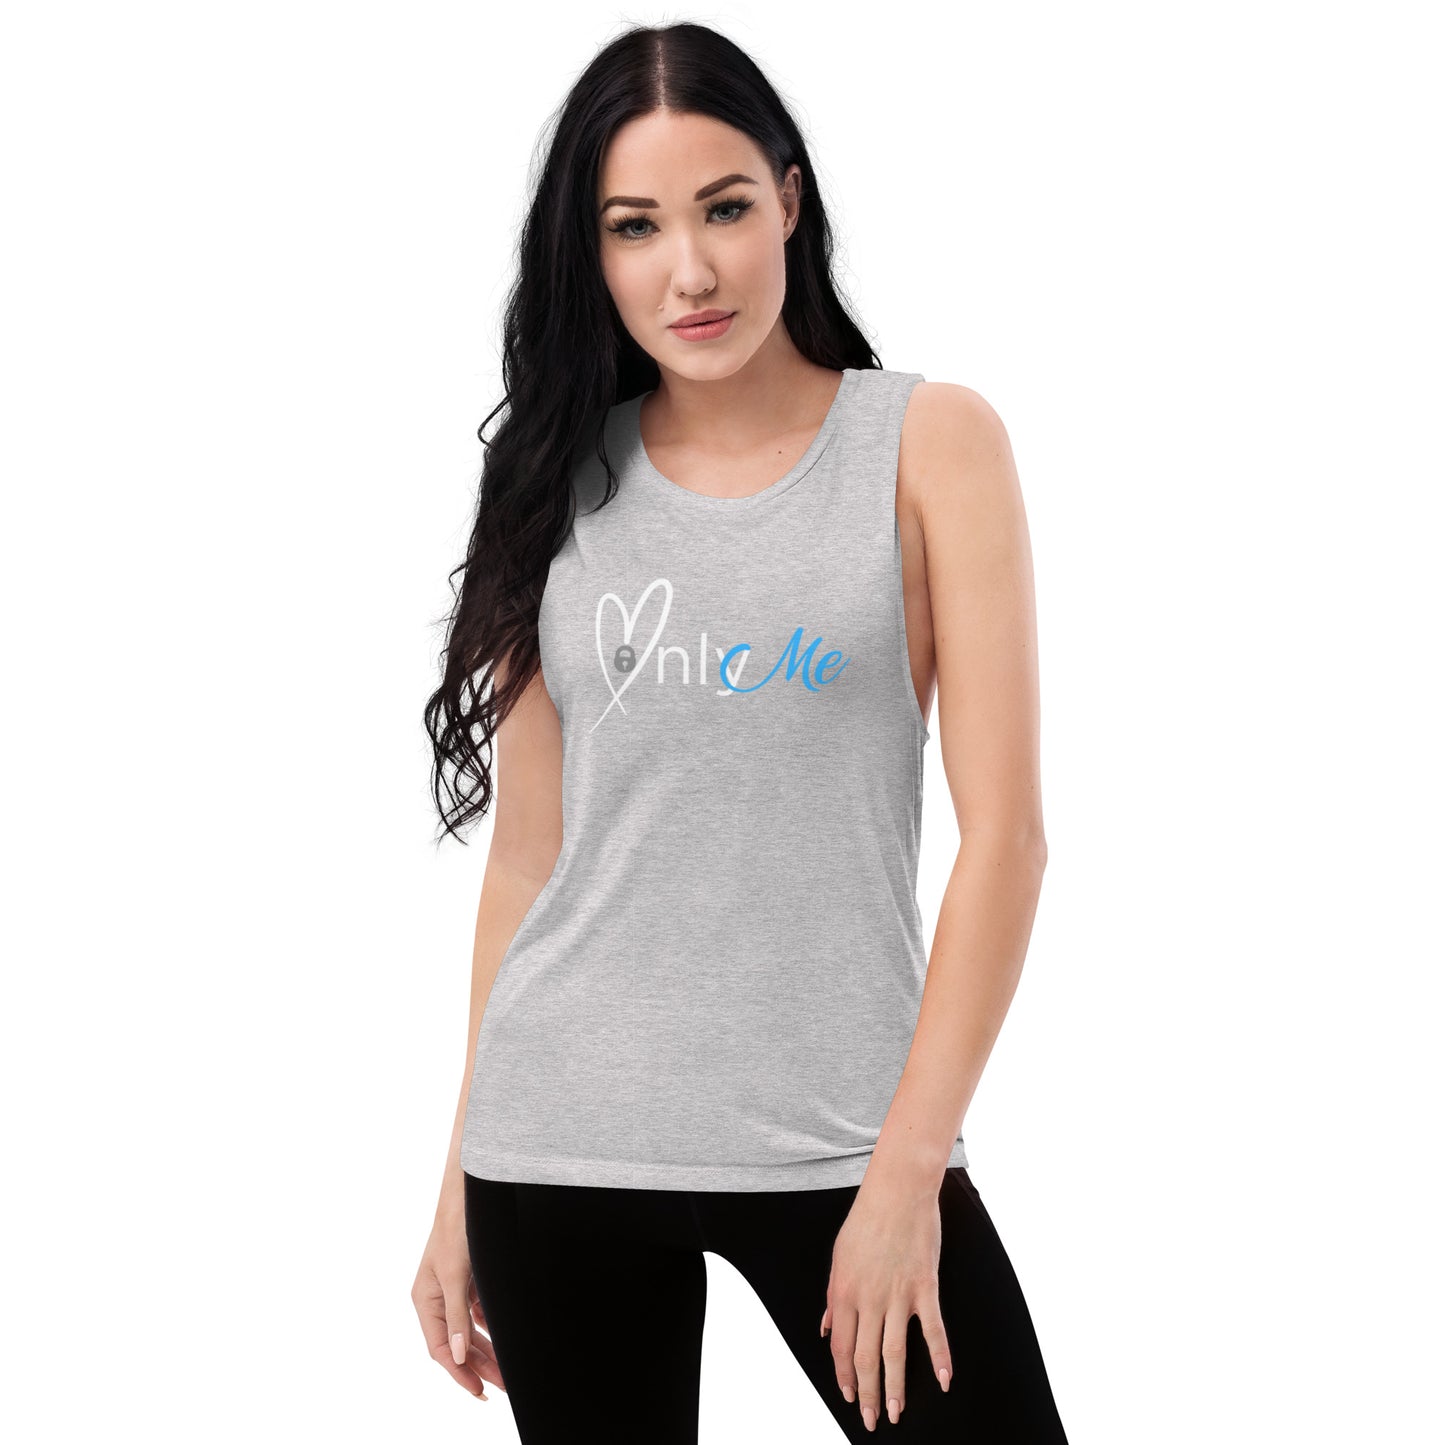 Admire Thread Only Me Ladies’ Muscle Tank